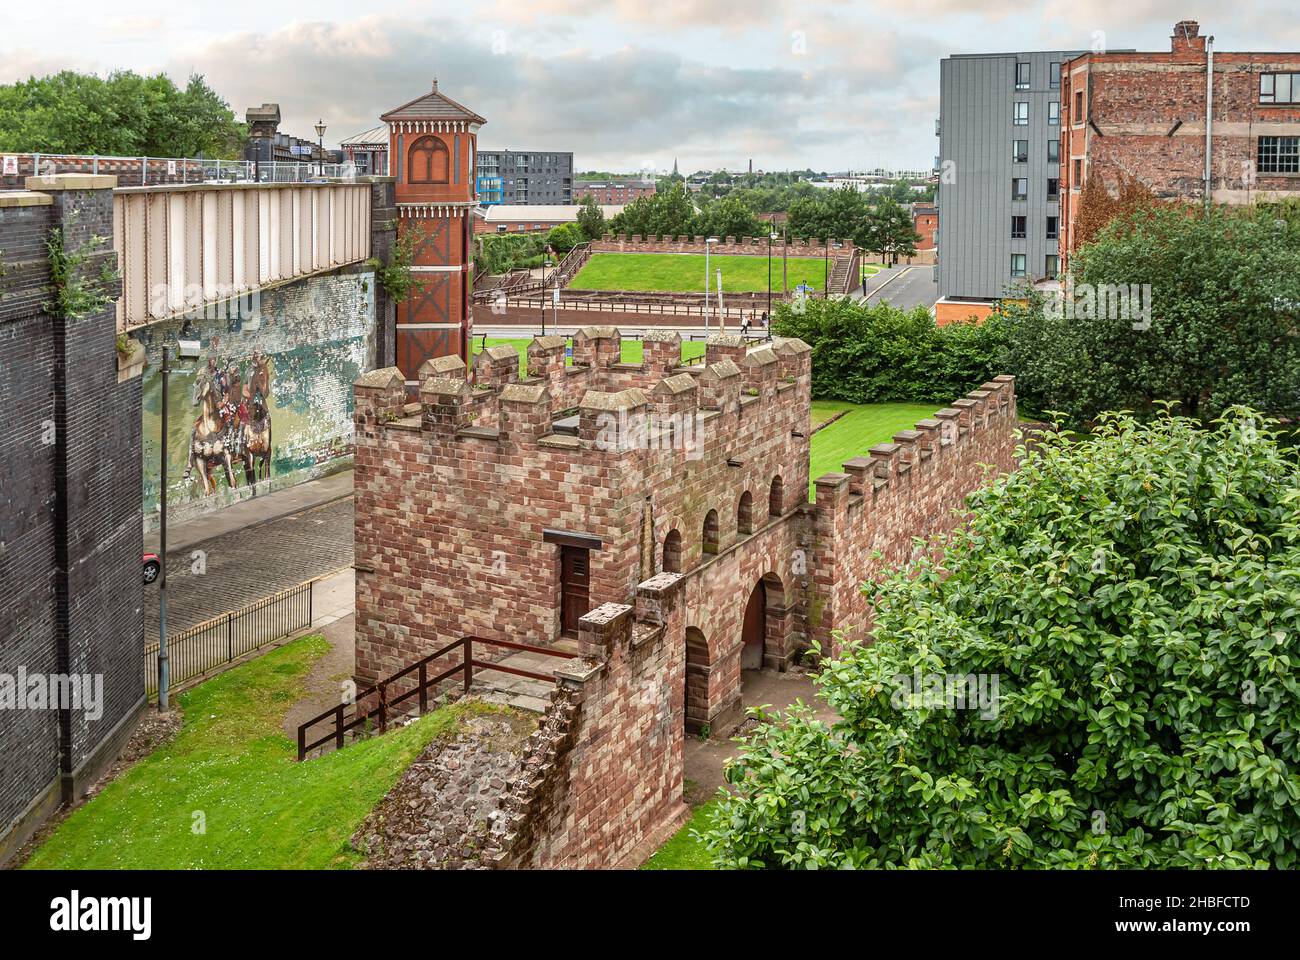 The remains of the Roman fort (Mamucium), protected as a Scheduled Ancient Monument in the Castlefield area of Manchester, England Stock Photo